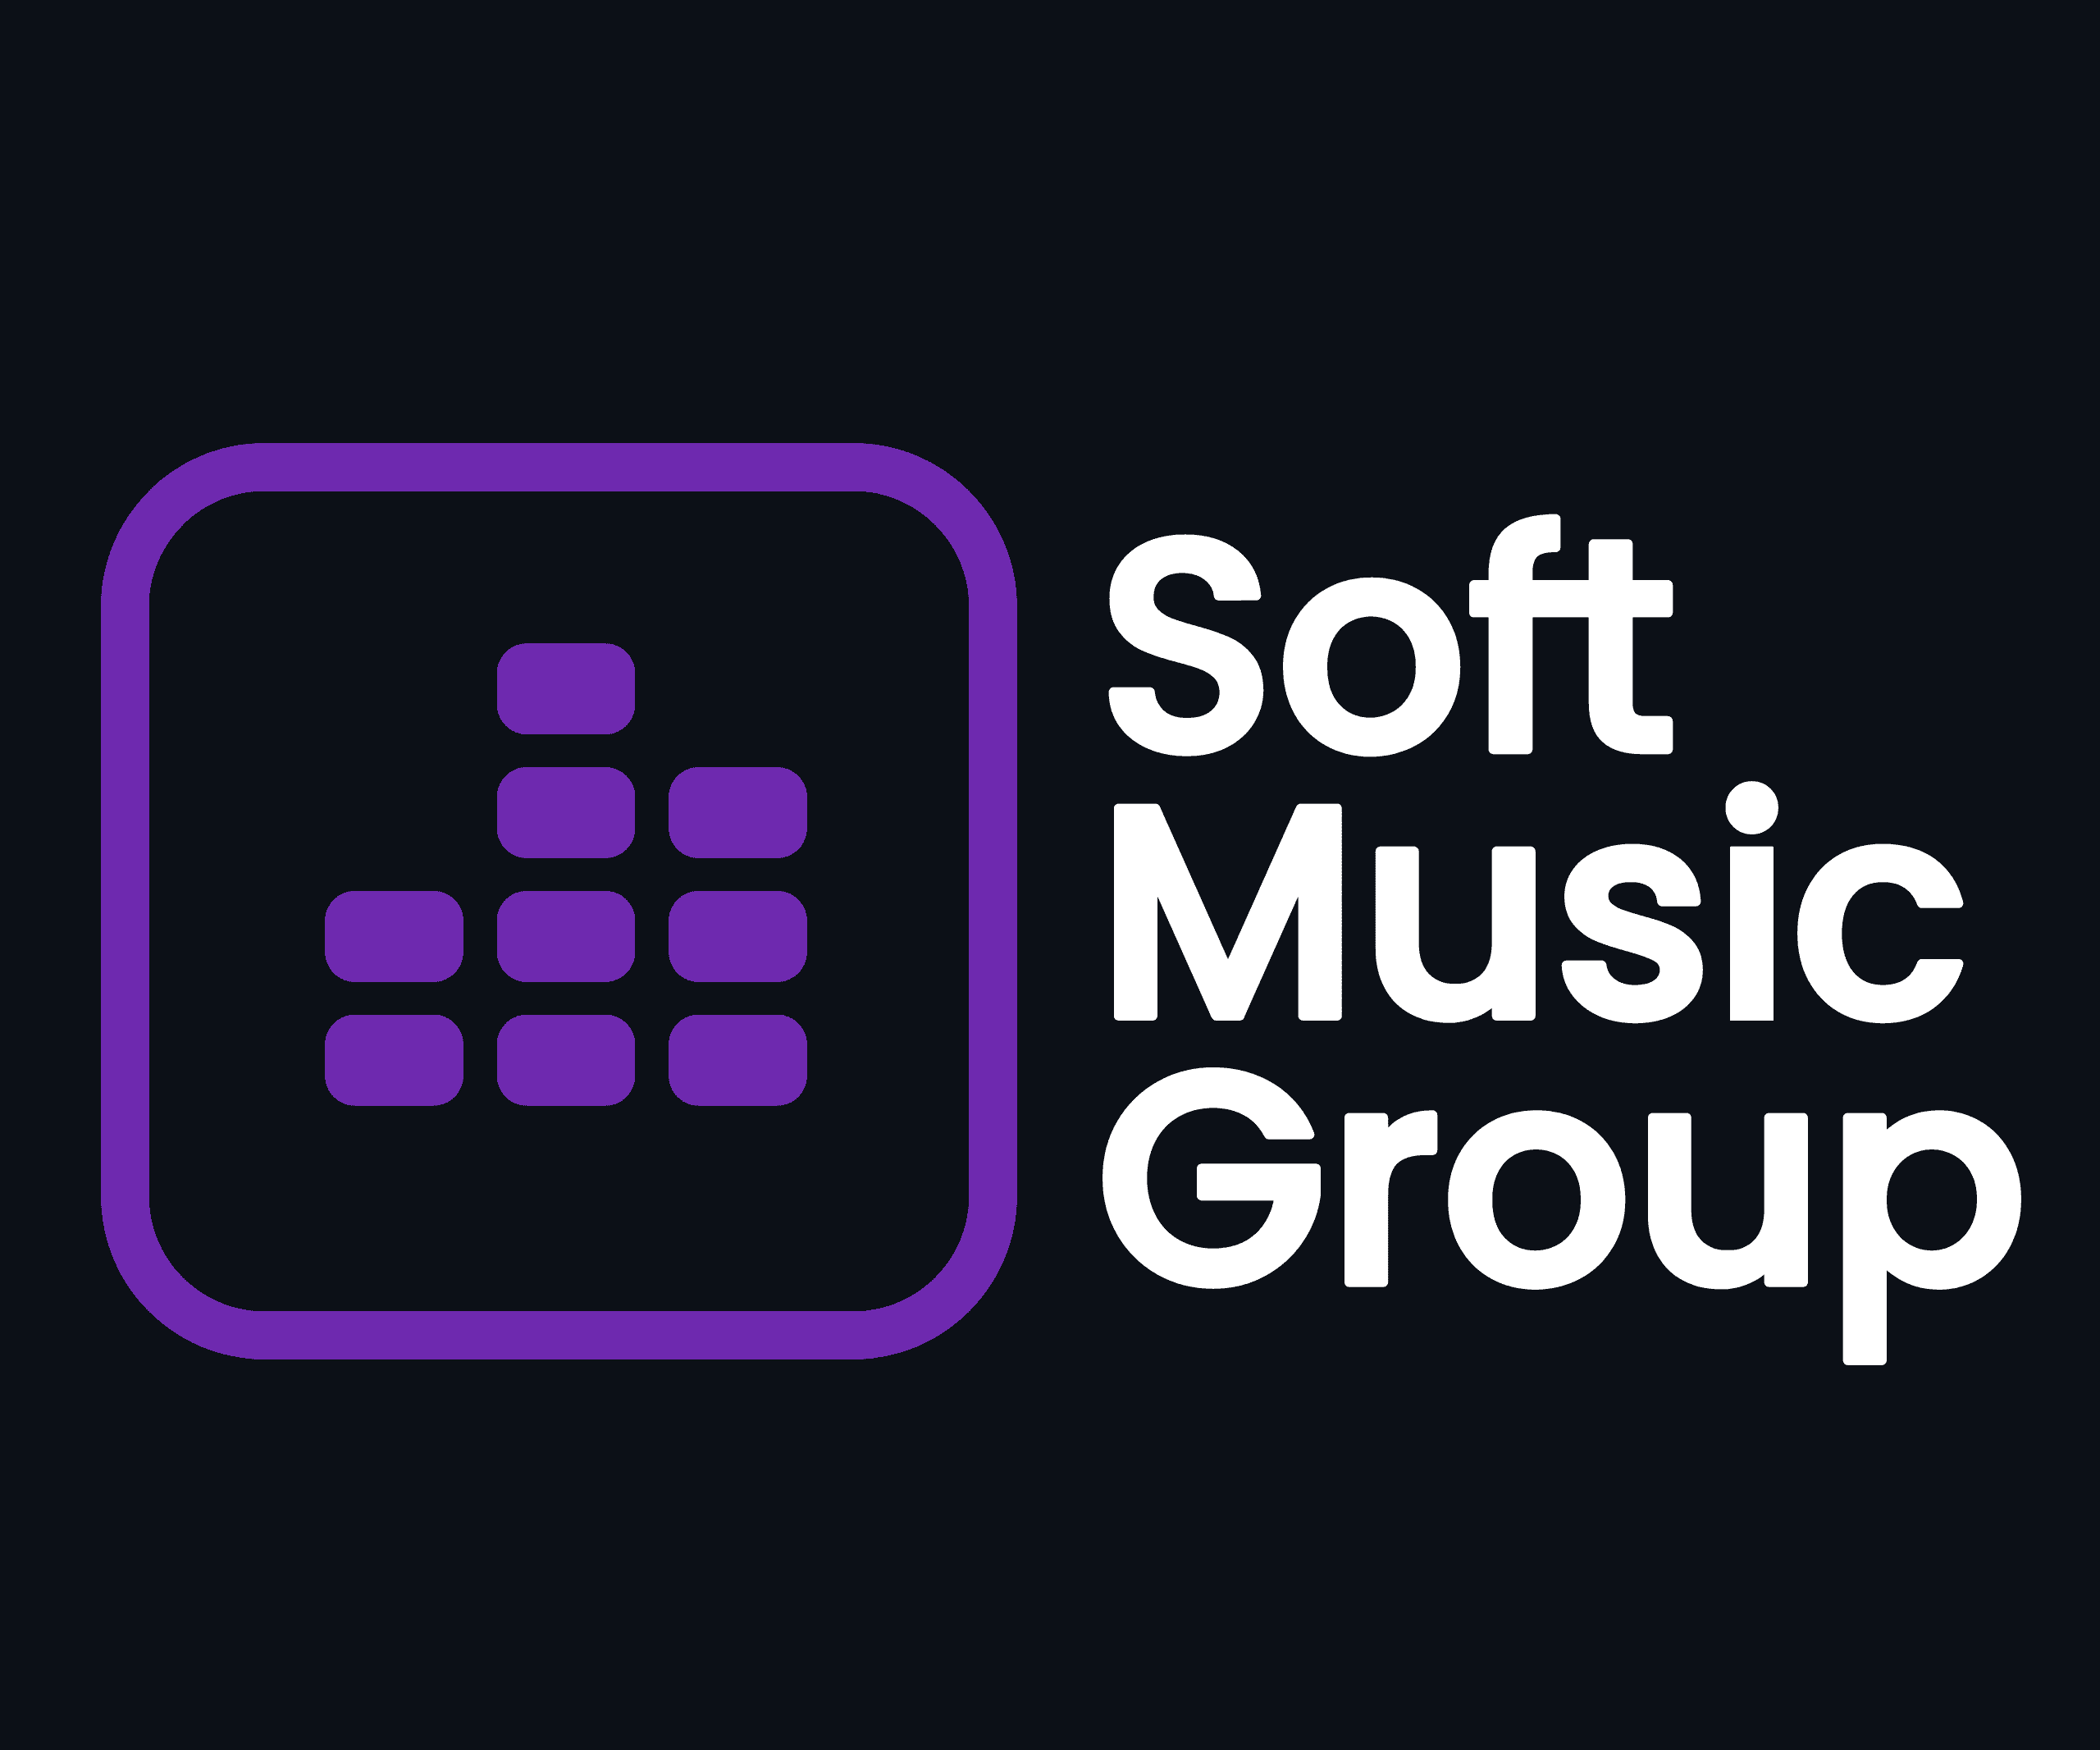 Soft Music Group official logo and brand identity